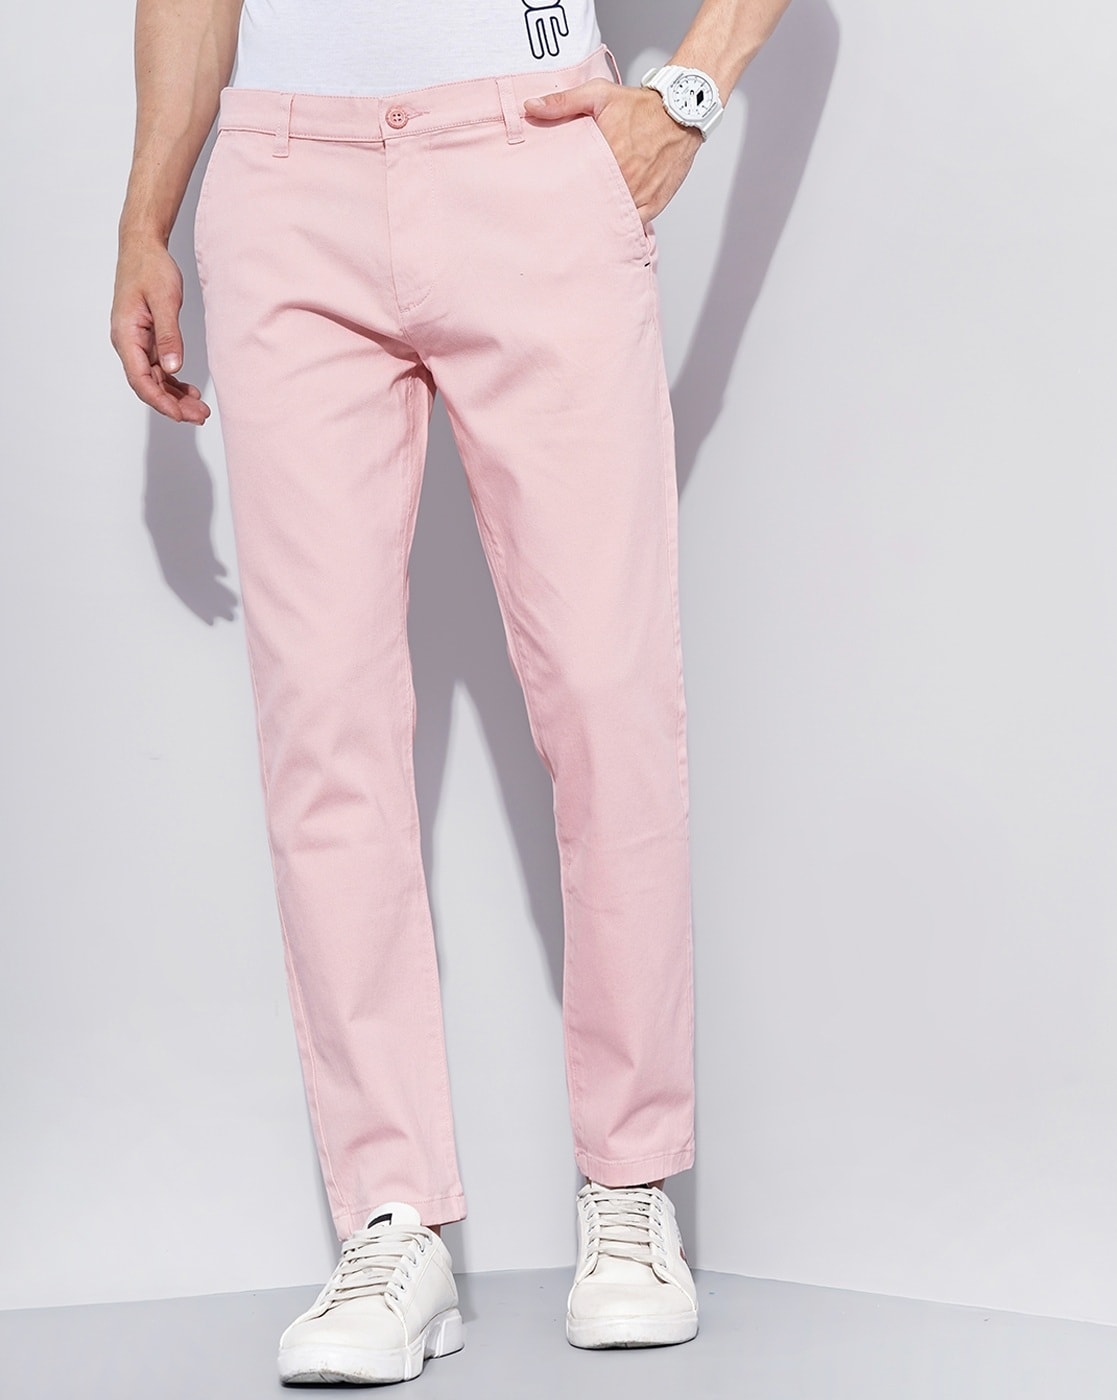 Mens Next Light Pink Straight Fit Stretch Chinos  Pink  Mens pink pants  Men fashion casual shirts Fitted denim shirt